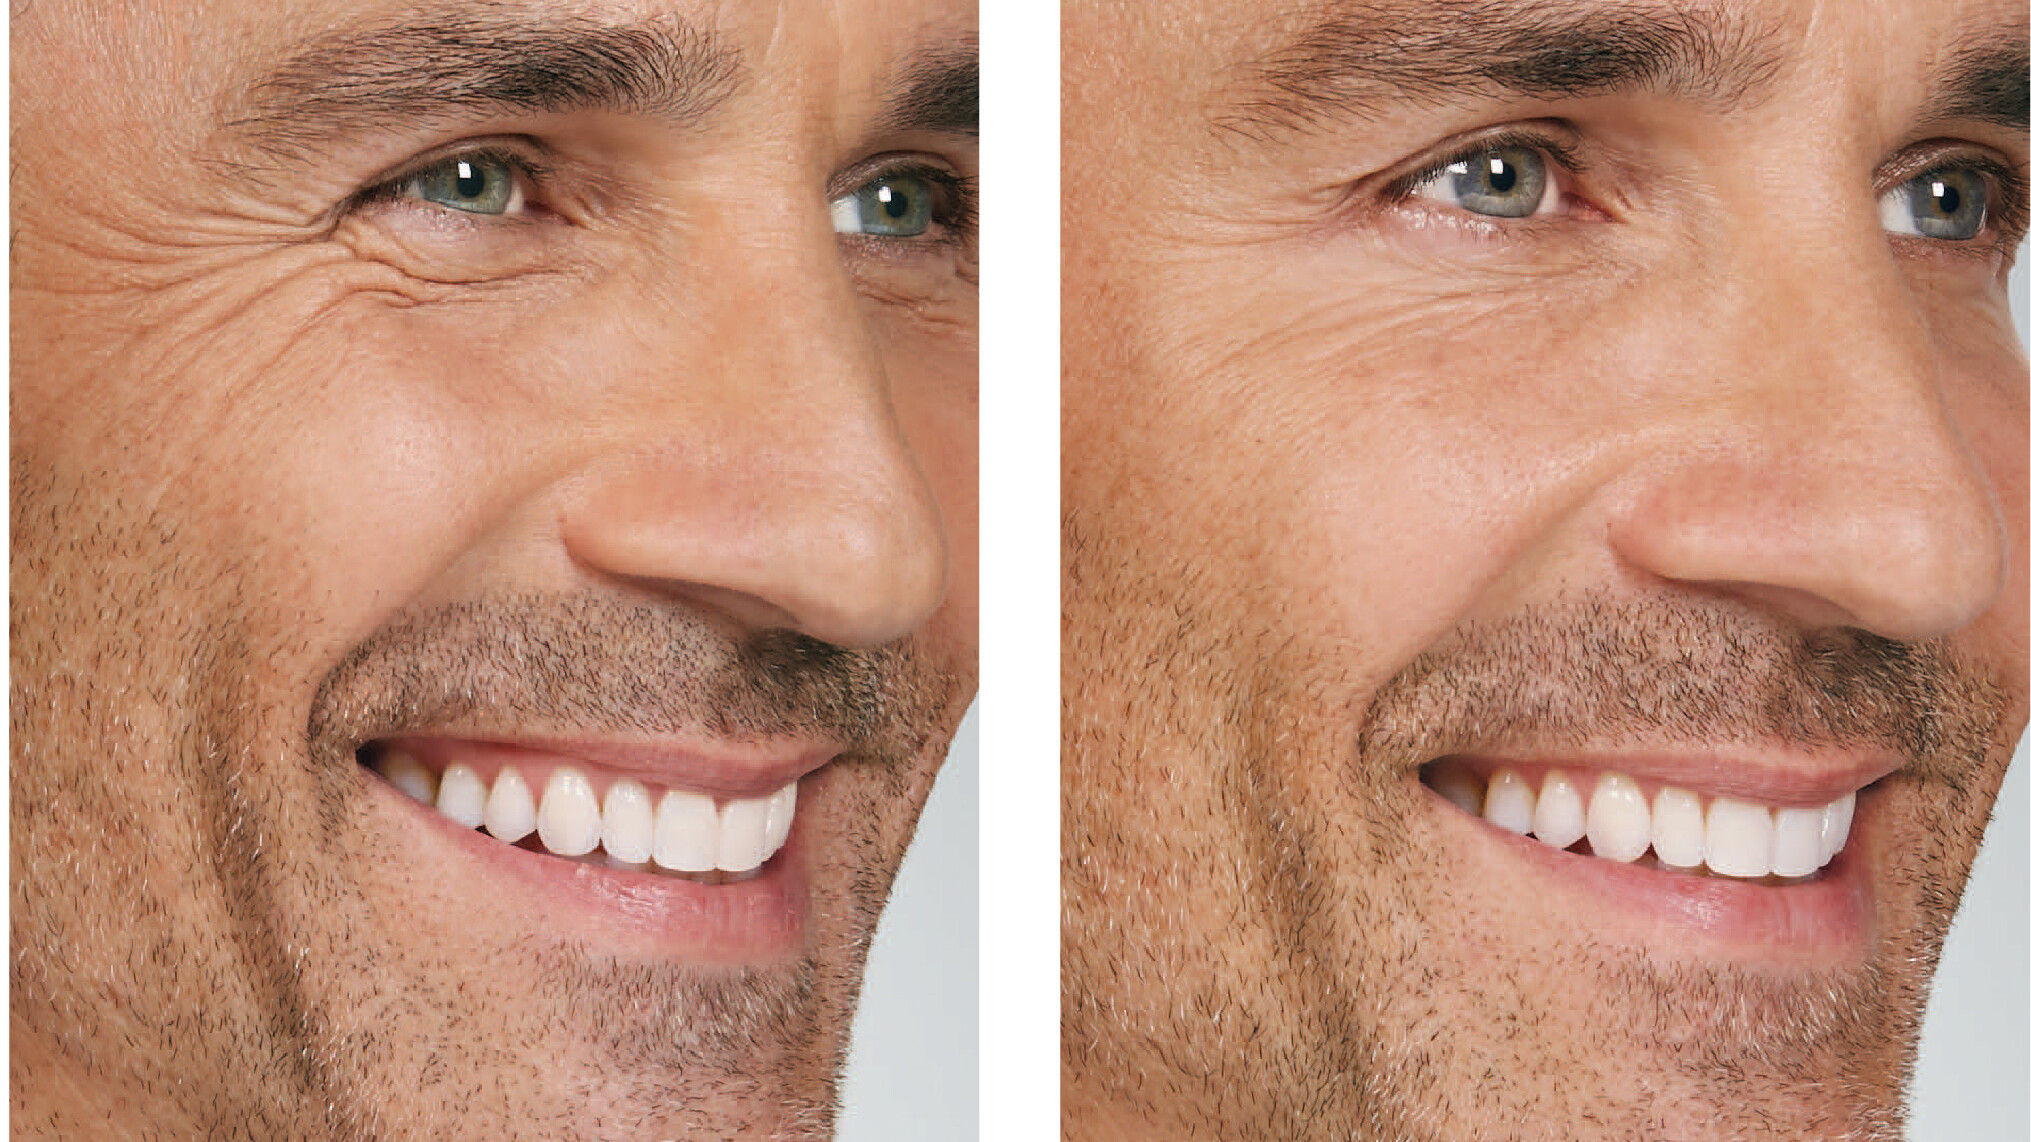 Before and after closeup photos of a man with stubble after getting facial treatment for crow's feet